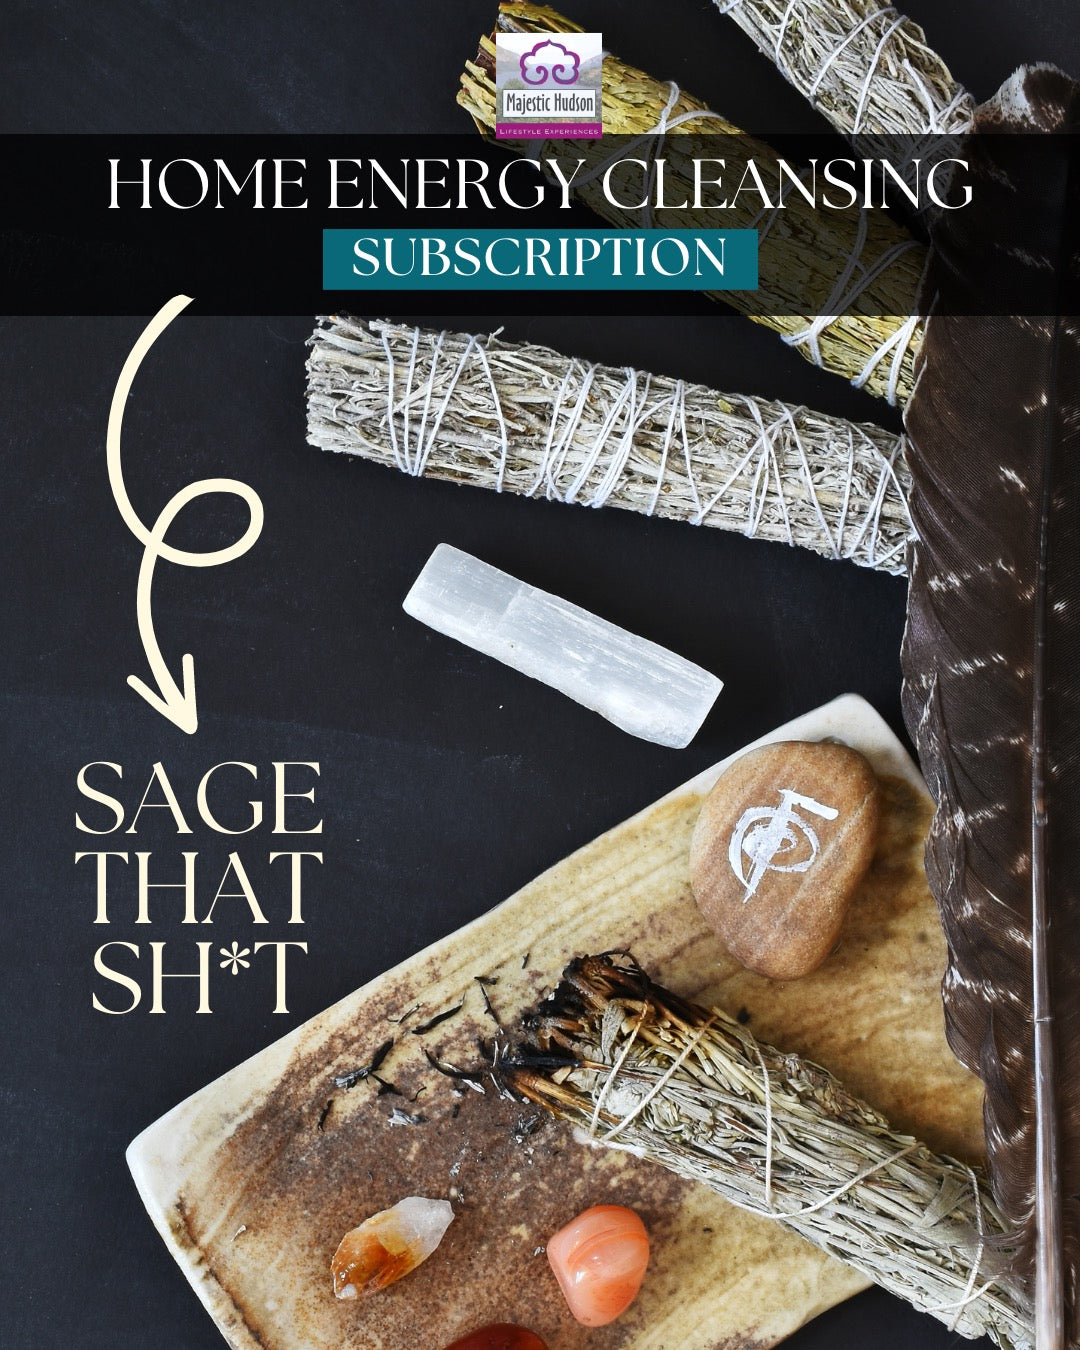 Home Energy Cleansing Subscription